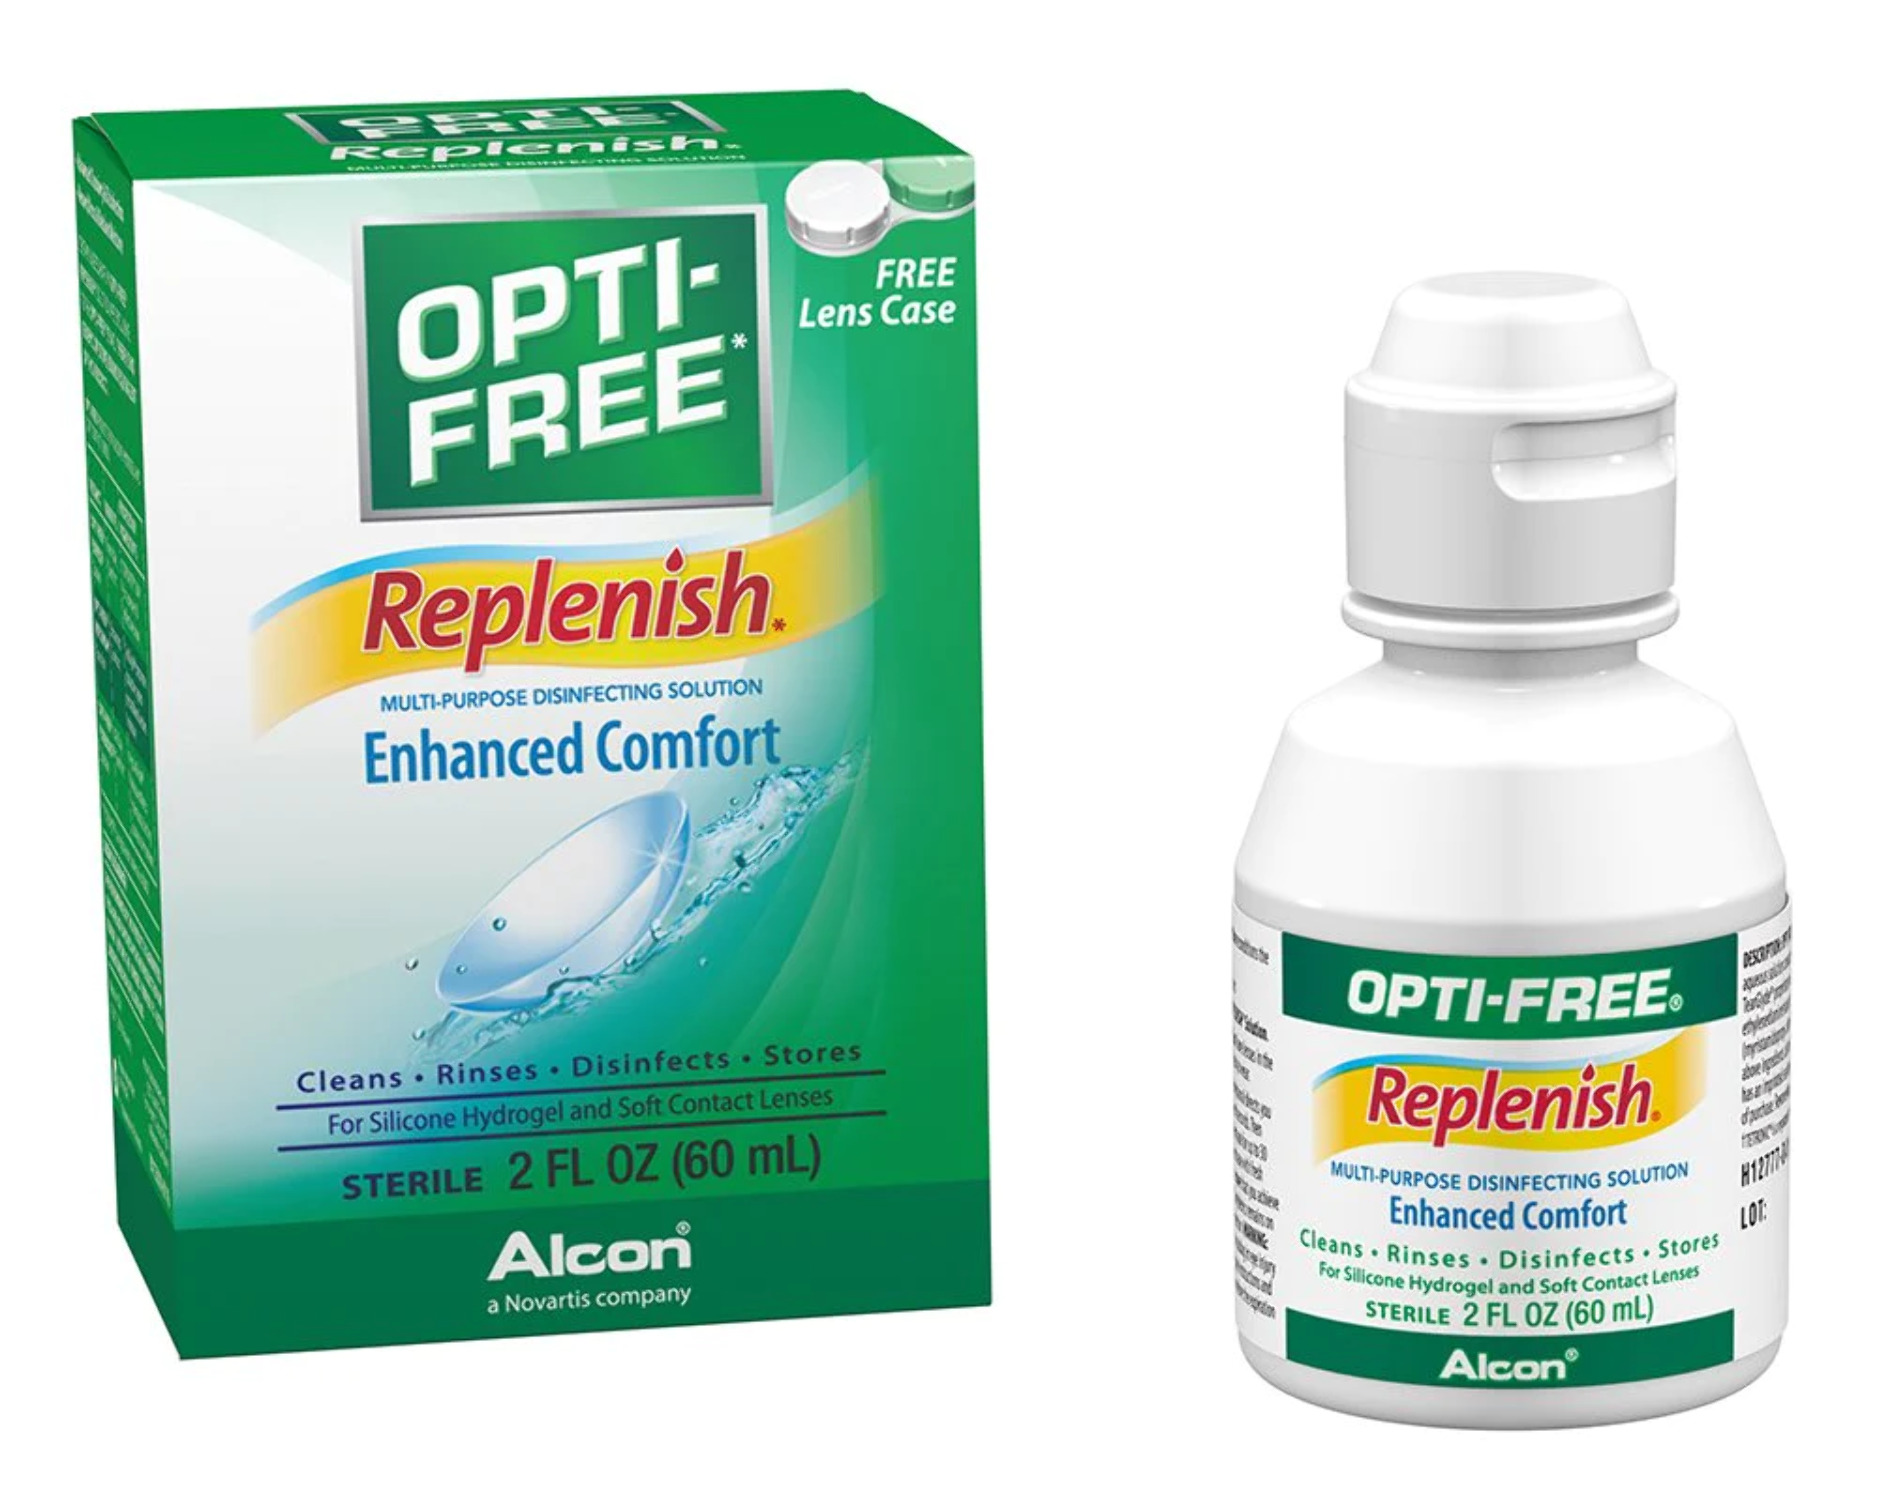 Opti-Free RepleniSH Multi Purpose Disinfecting Solution-2 oz (60 ml), Carry On Size - image 1 of 6